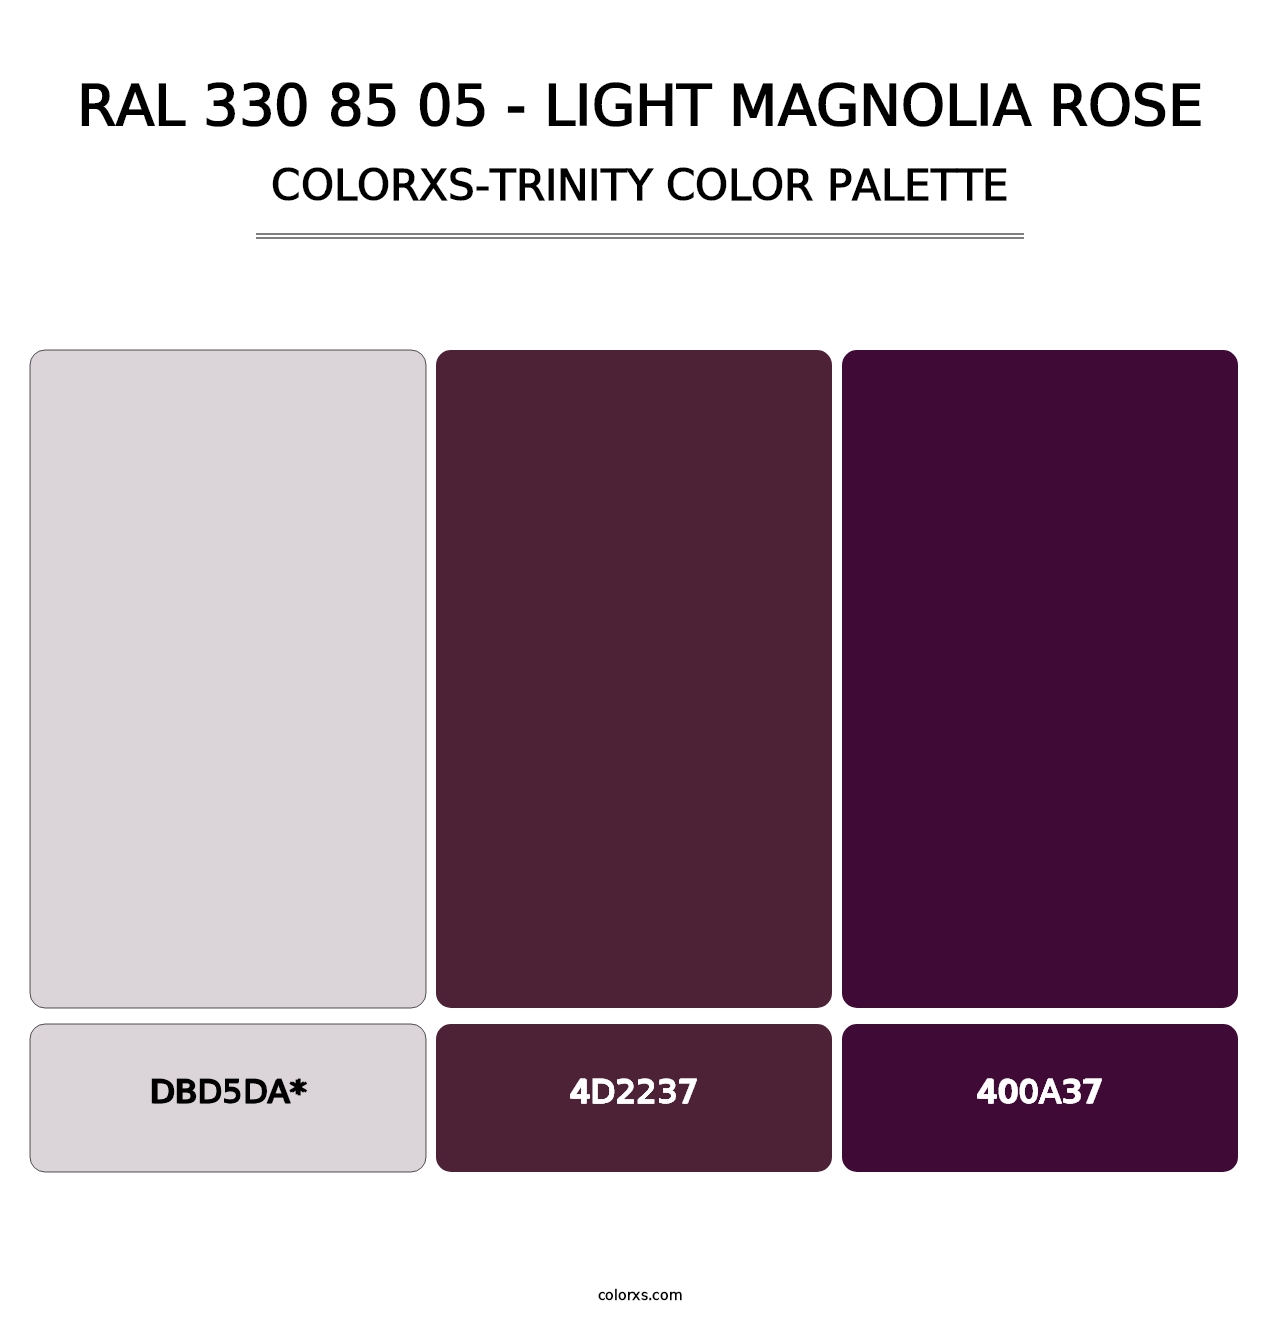 RAL 330 85 05 - Light Magnolia Rose - Colorxs Trinity Palette